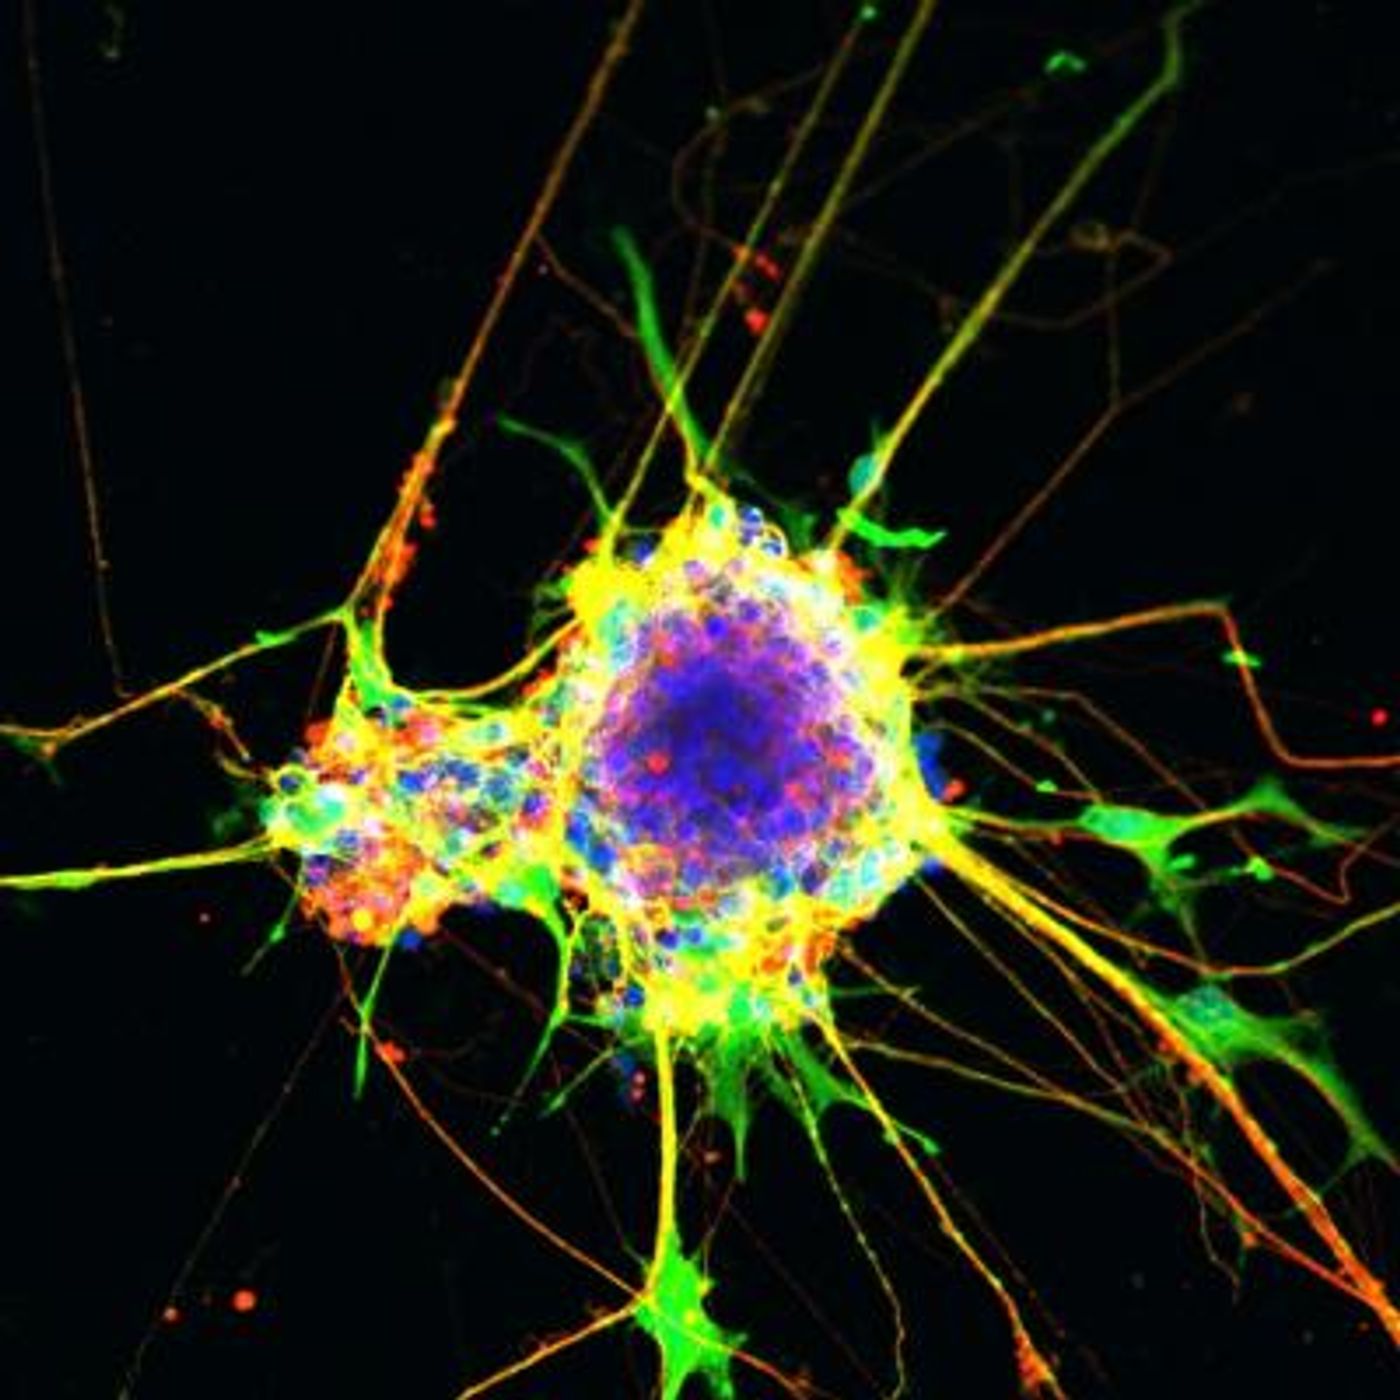 Neurons generated using the cell culture method described in the paper. / Credit: Salk Institute